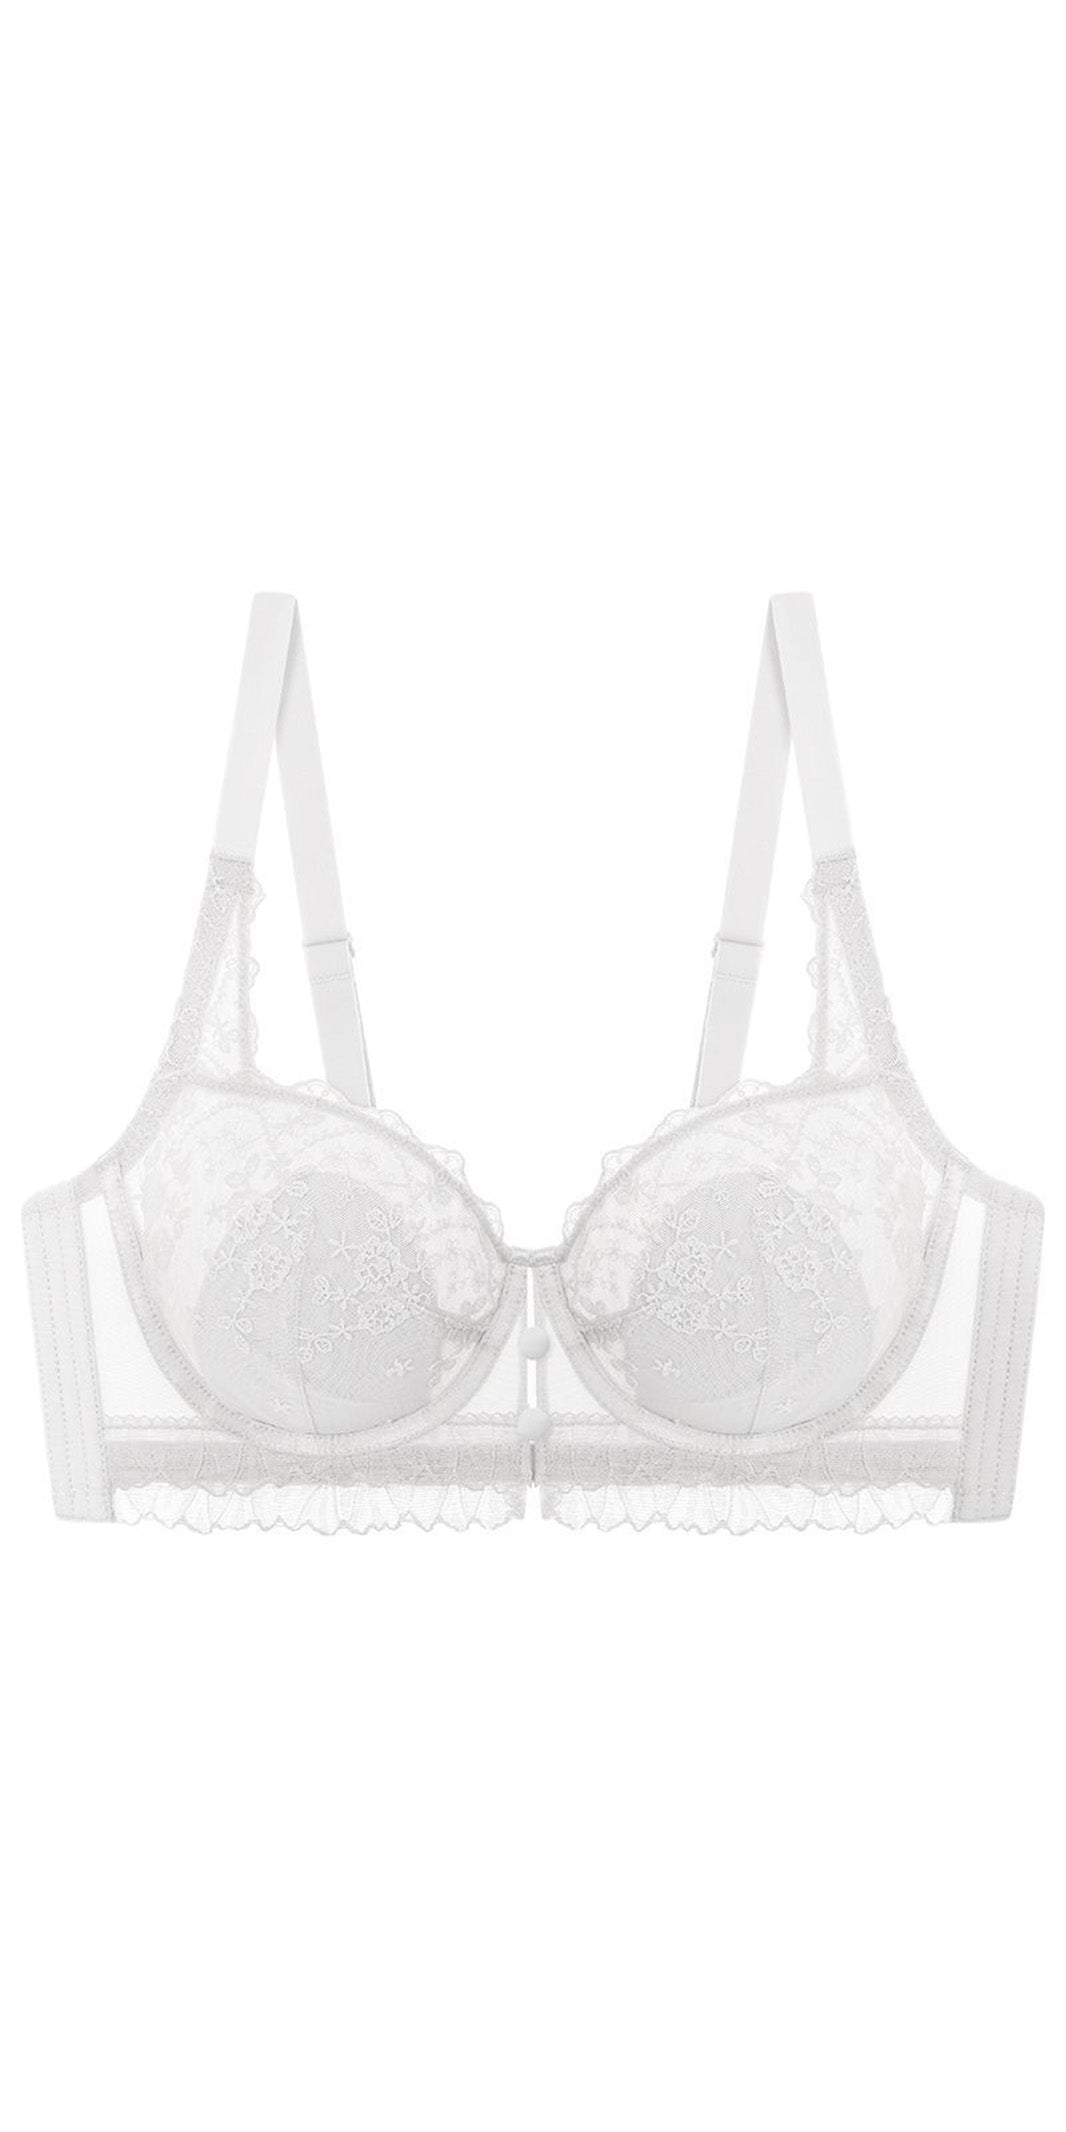 Large Size Gathering Collecting Side Breasts Anti-Sagging Lace Thin Bra